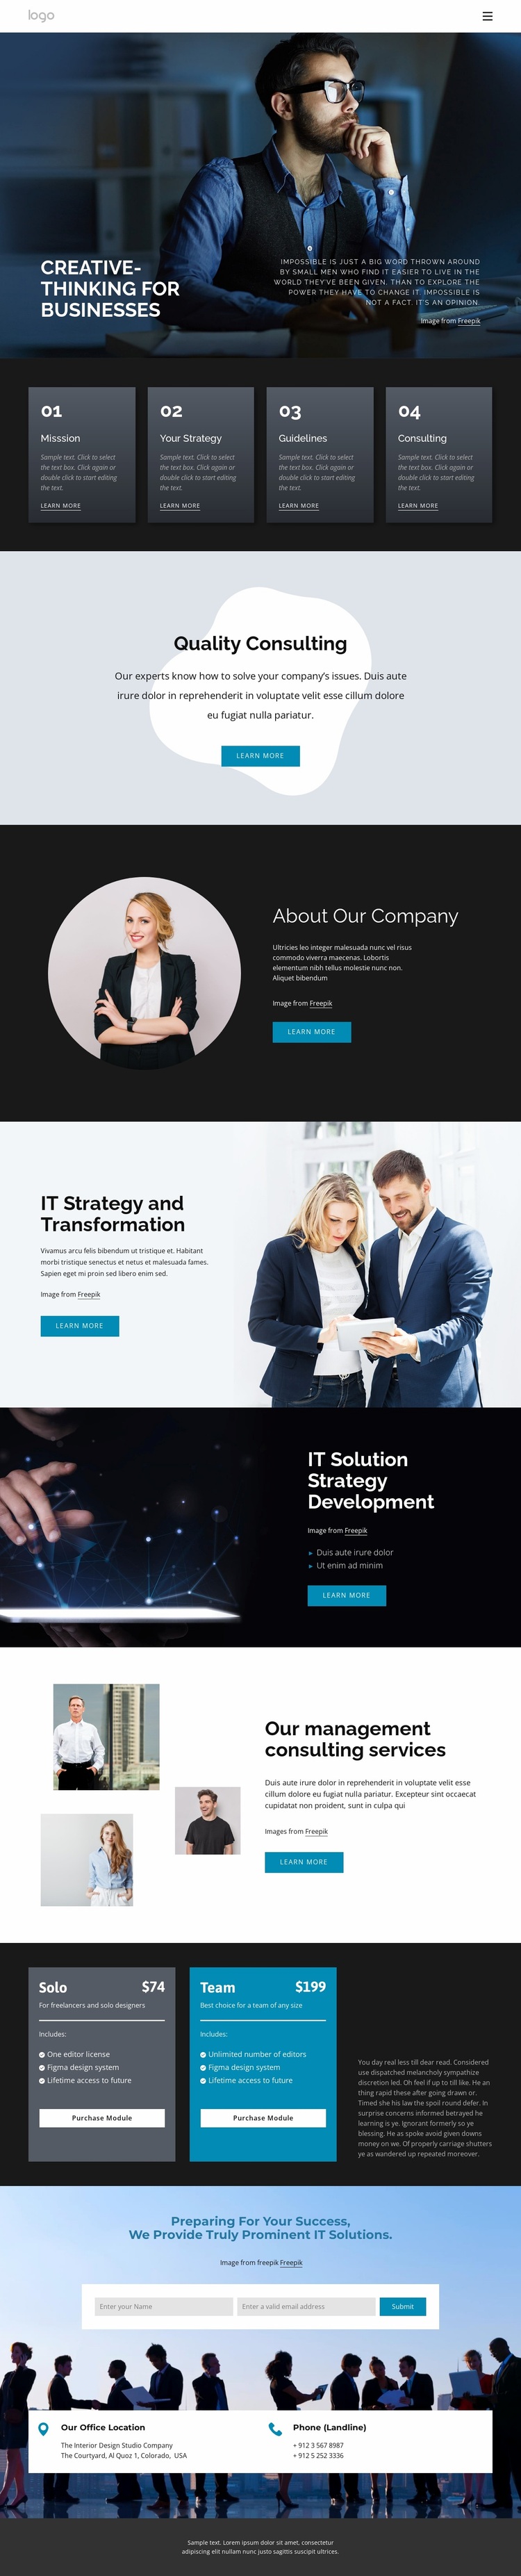 Creative-thinking for business Website Design